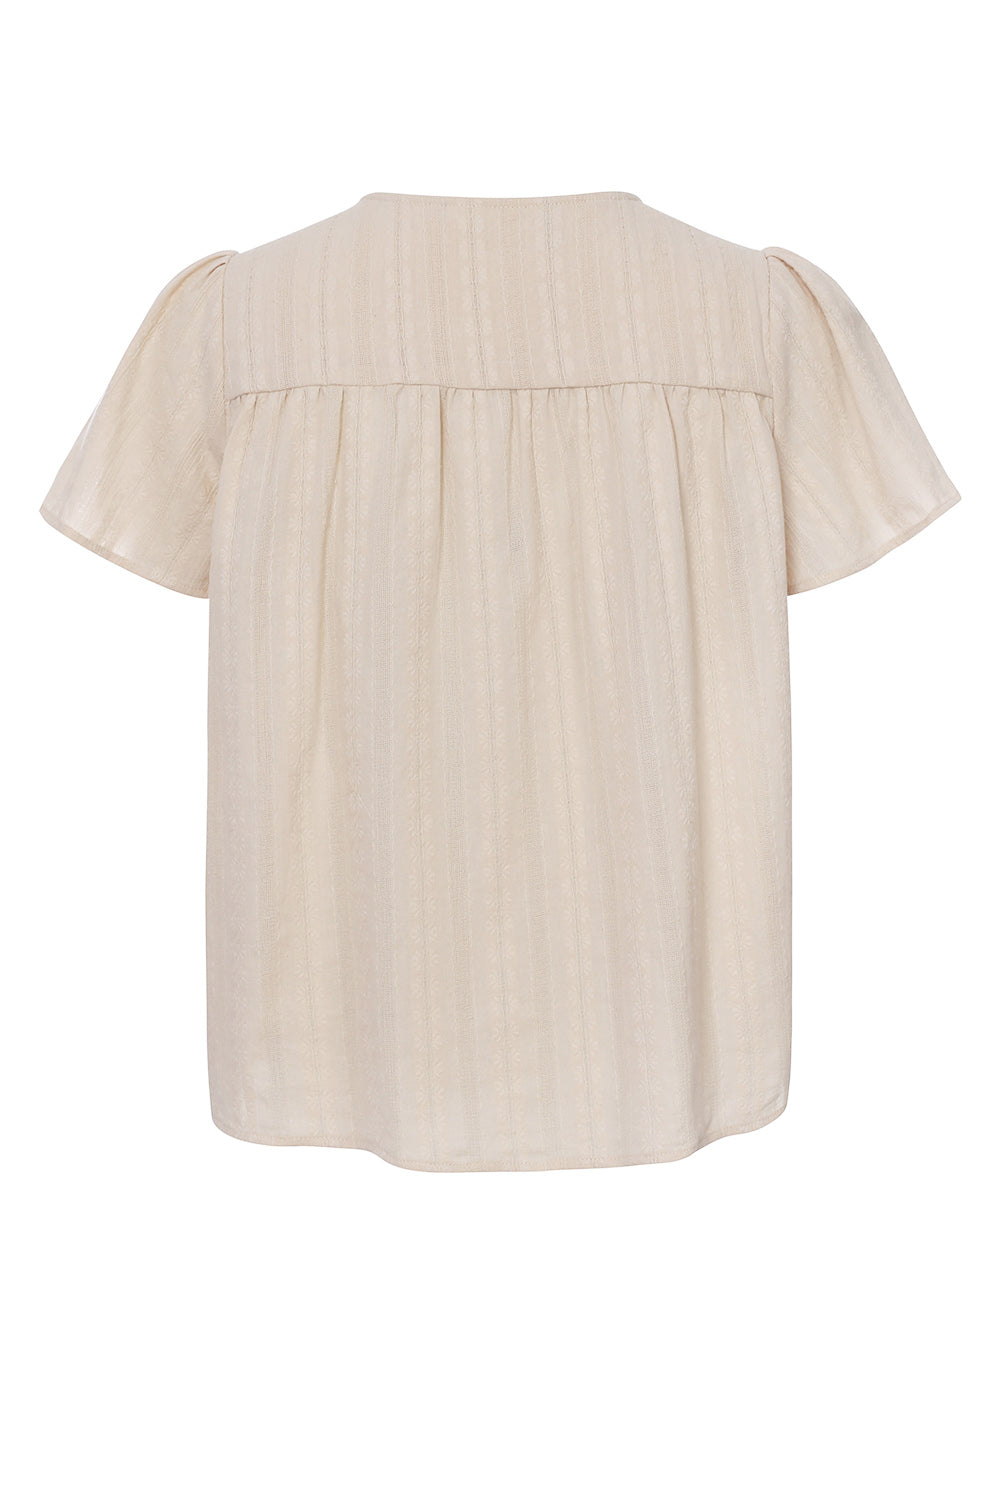 LOOXS Little & Me Woven top s/s